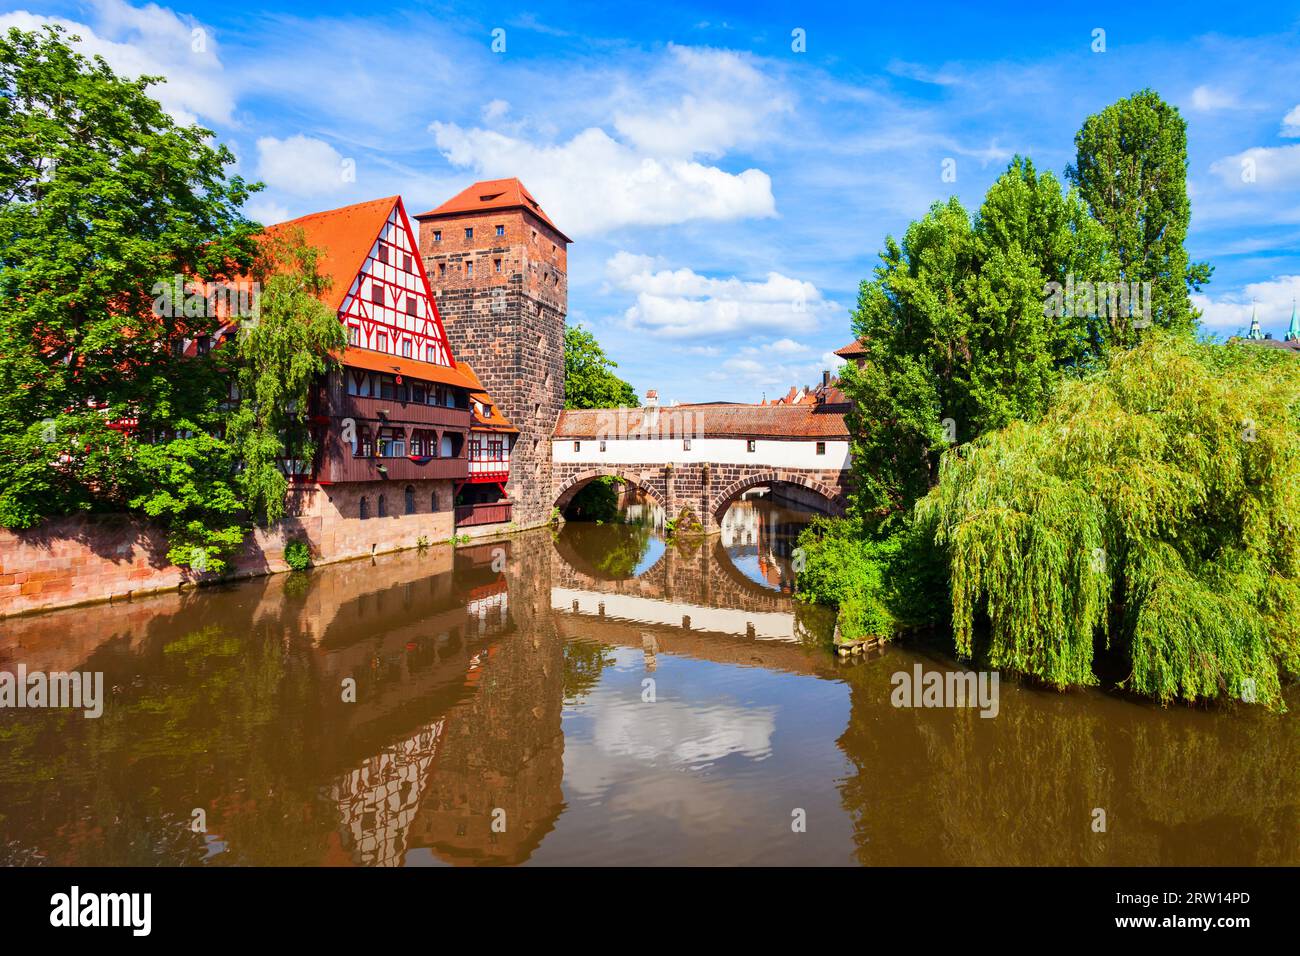 Wasserturm tower, Weinstadel medieval house and Henkerbrucke bridge at Pegnitz river in Nuremberg old town. Nuremberg is the second largest city of Ba Stock Photo